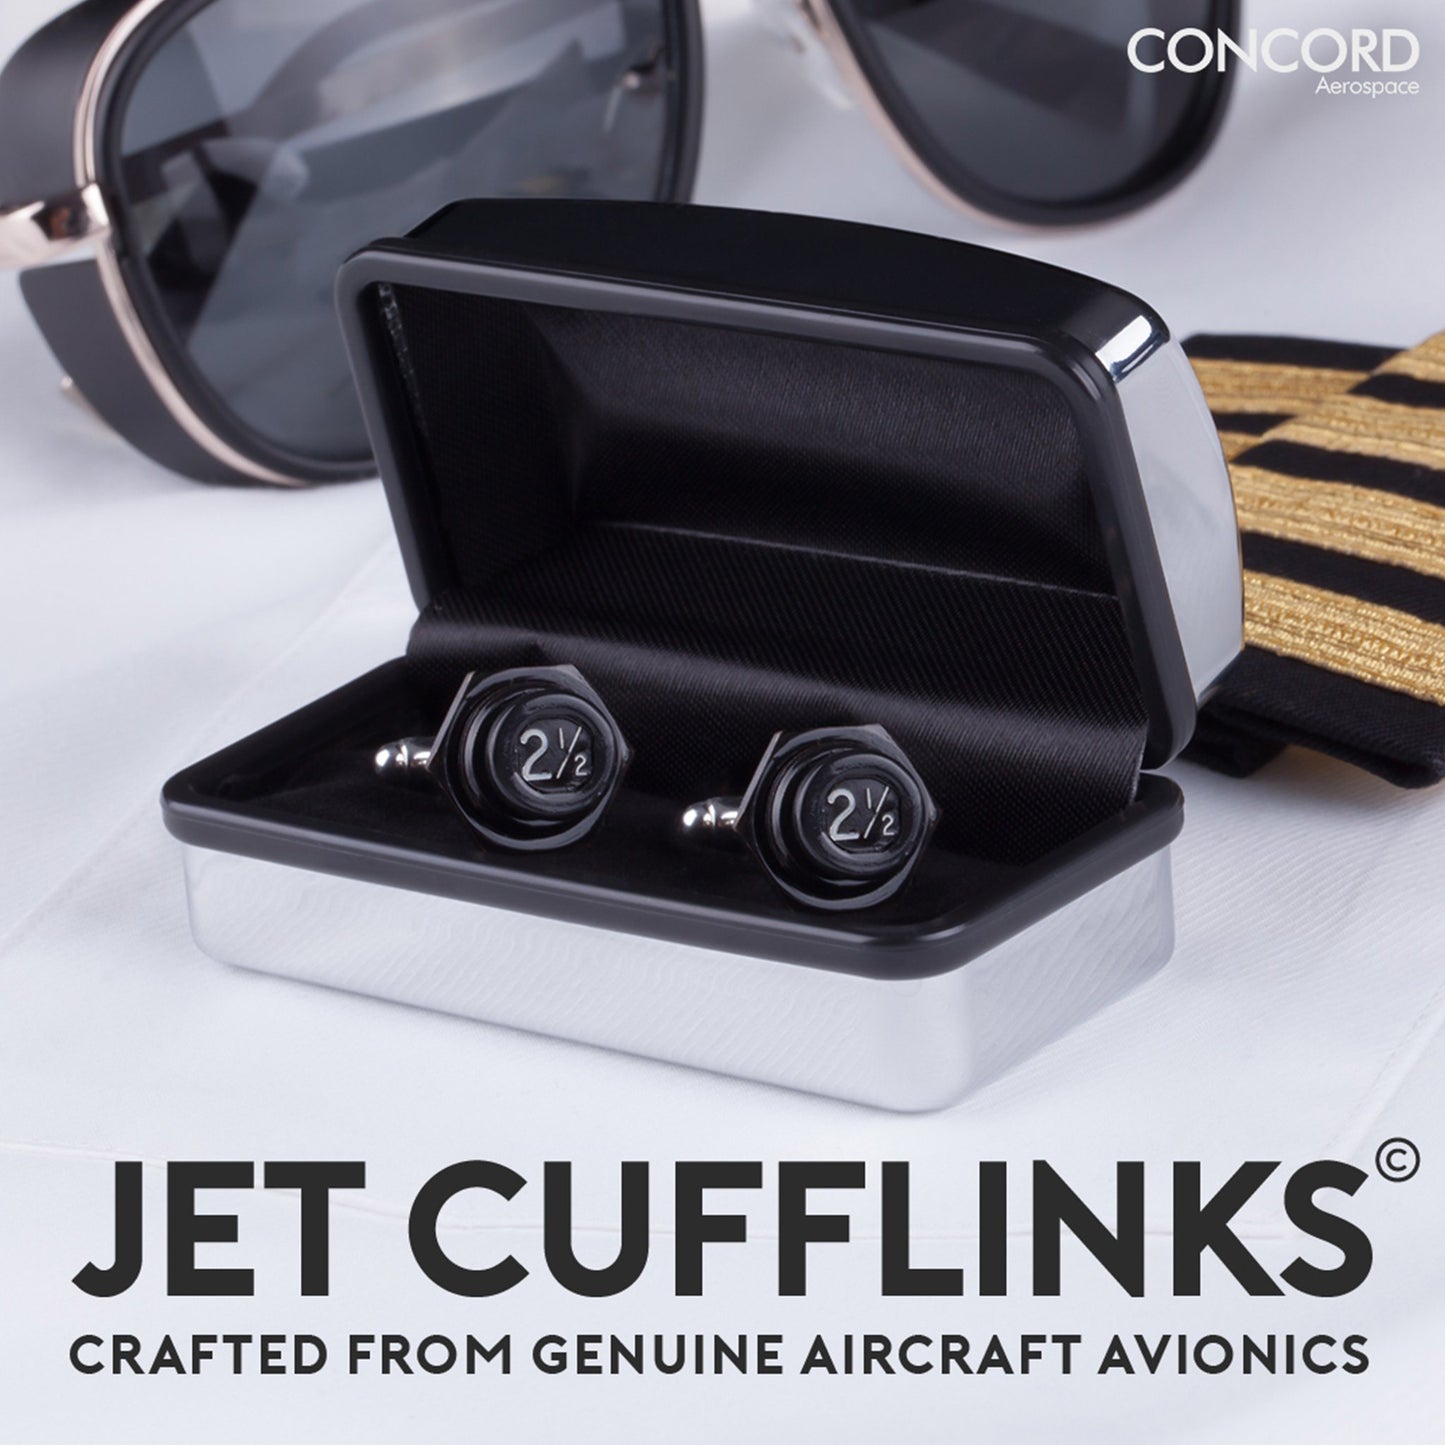 JET CUFFLINKS - CRAFTED FROM THE MIGHTY BOEING 747 - Concord Aerospace Concord Aerospace Concord Aerospace cufflinks